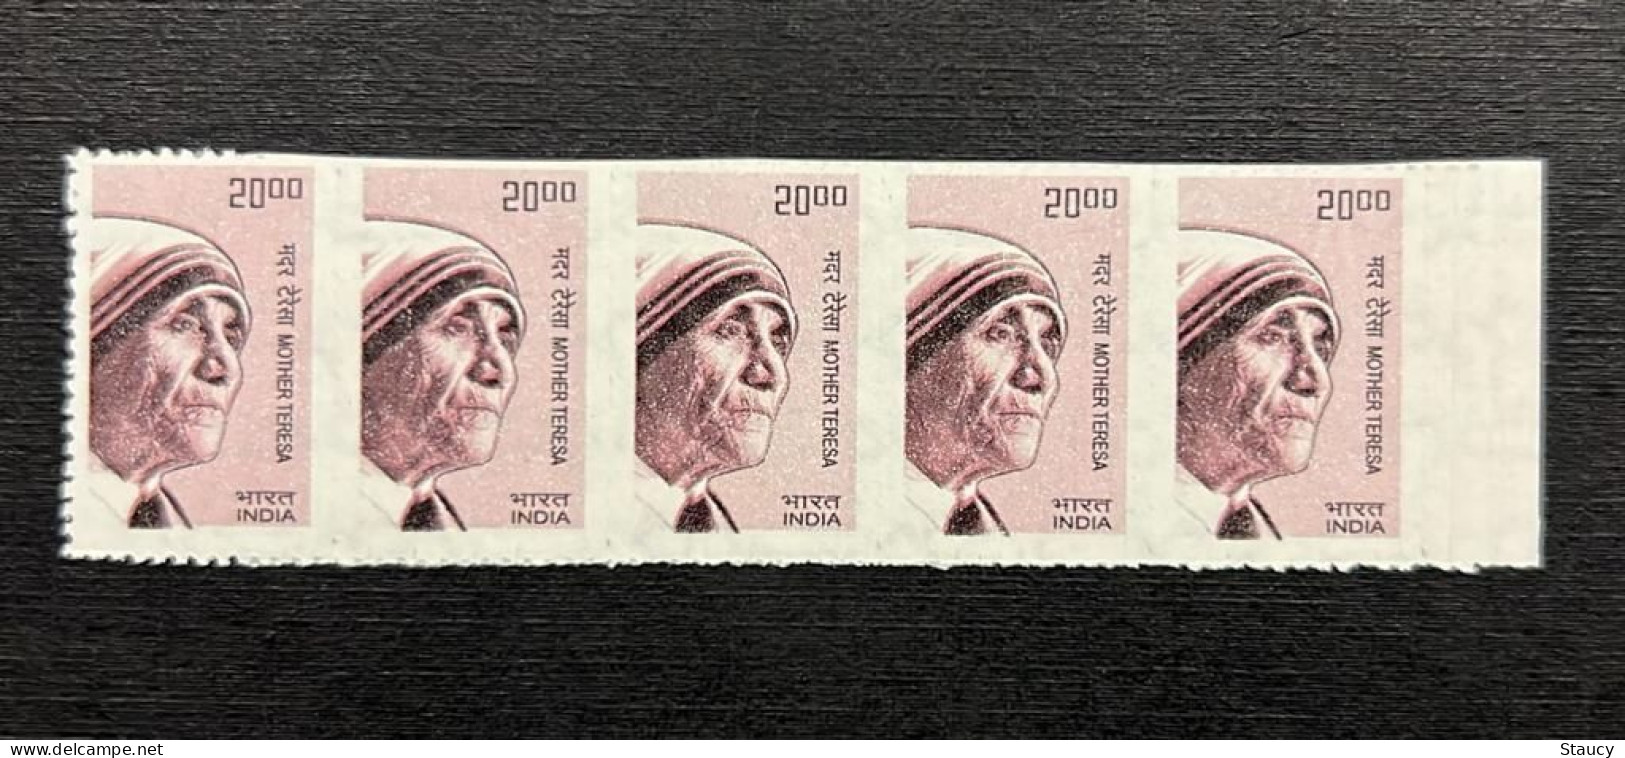 INDIA 2009 Error 10th. Definitive Series, Error "Imperf Strip Of 5 Stamps" Of "Mother Teresa" MNH As Per Scan - Errors, Freaks & Oddities (EFO)